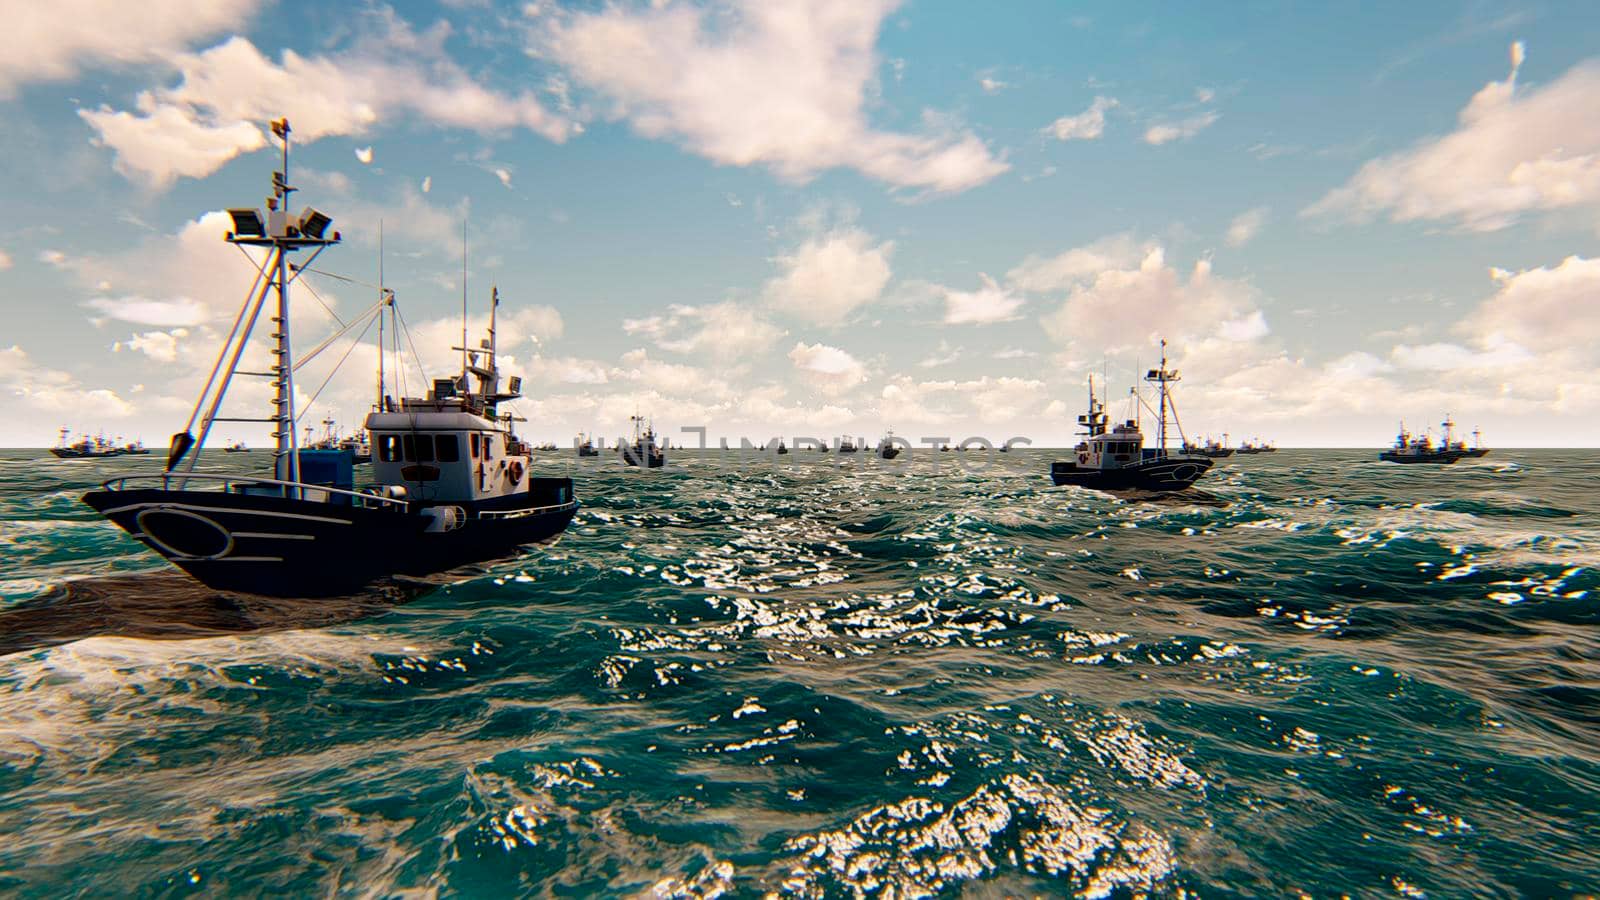 View of the Beautiful Blue Calm Sea and commercial fishing boats. 3D Rendering by designprojects